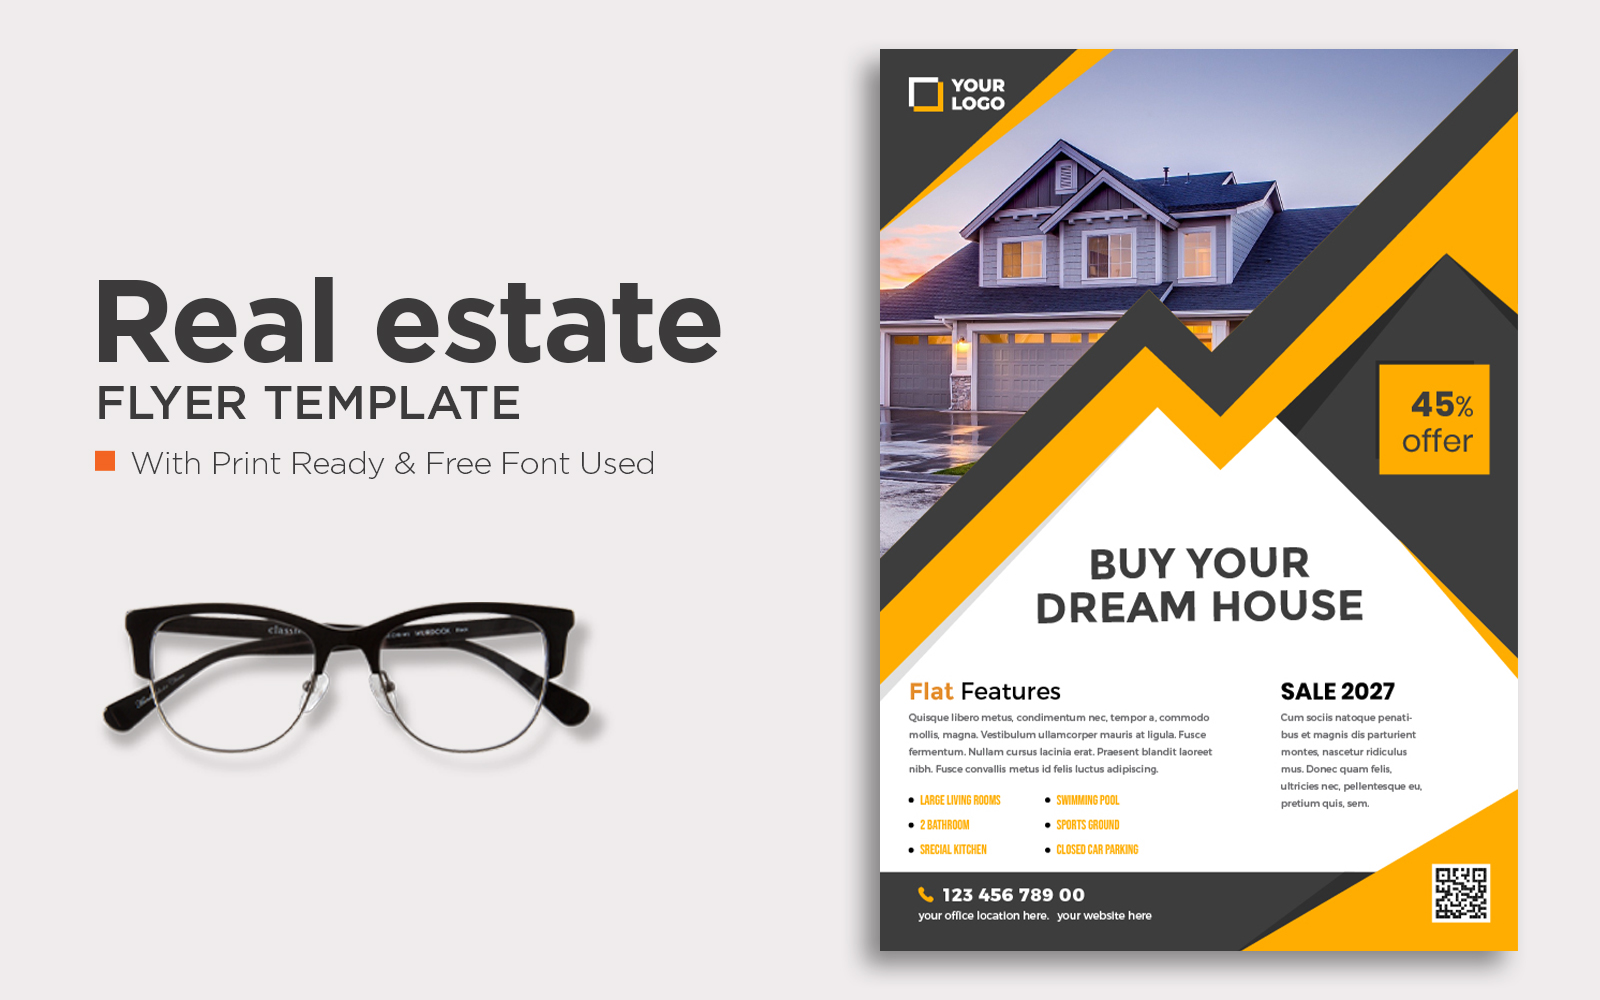 New Home Flyer Template Design